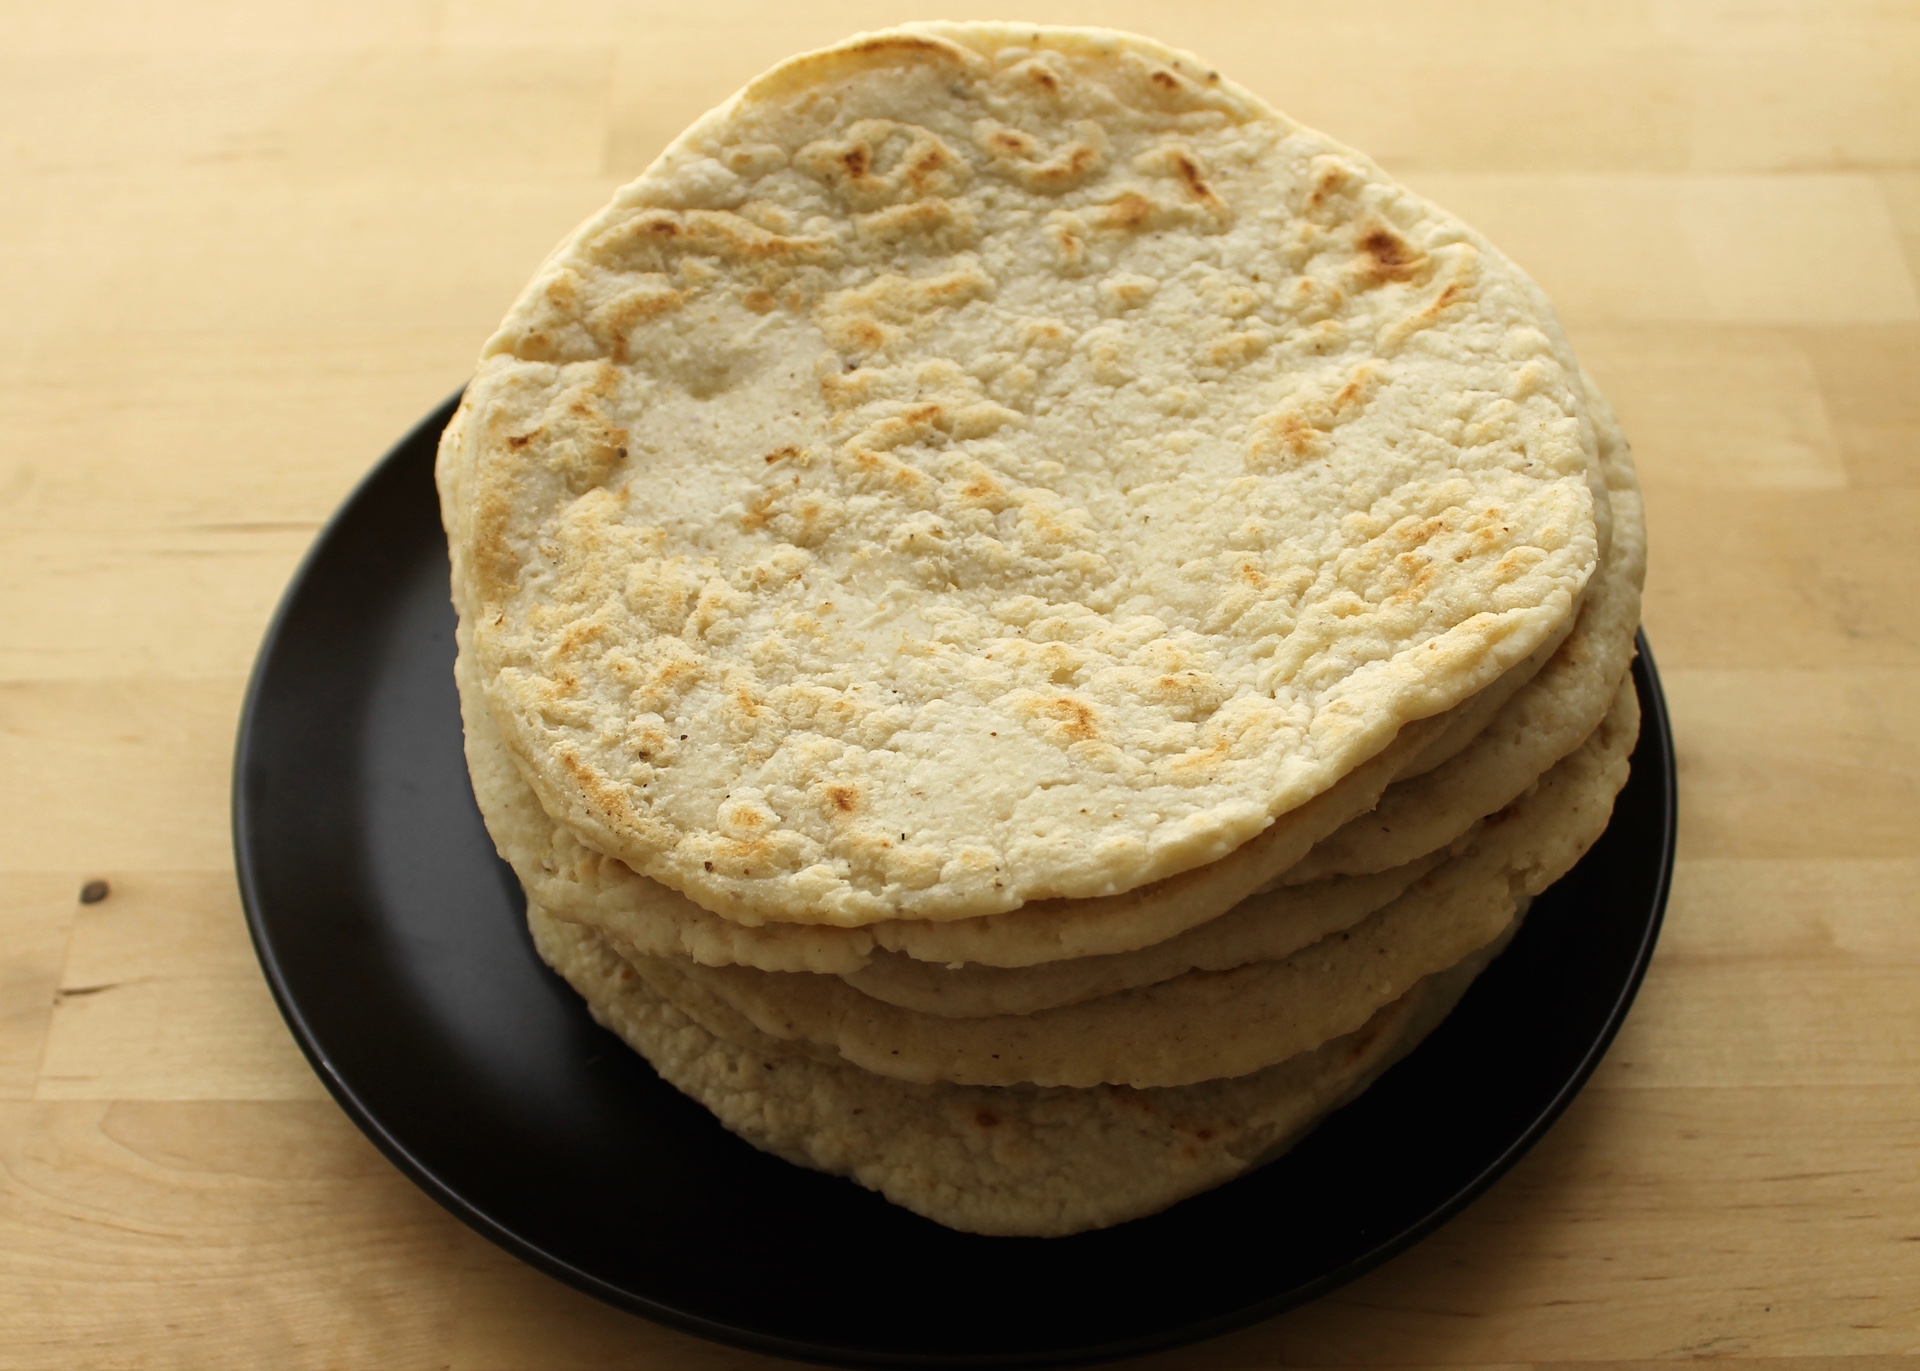 For the best hearty, handmade tortillas, look no further than La Palma.